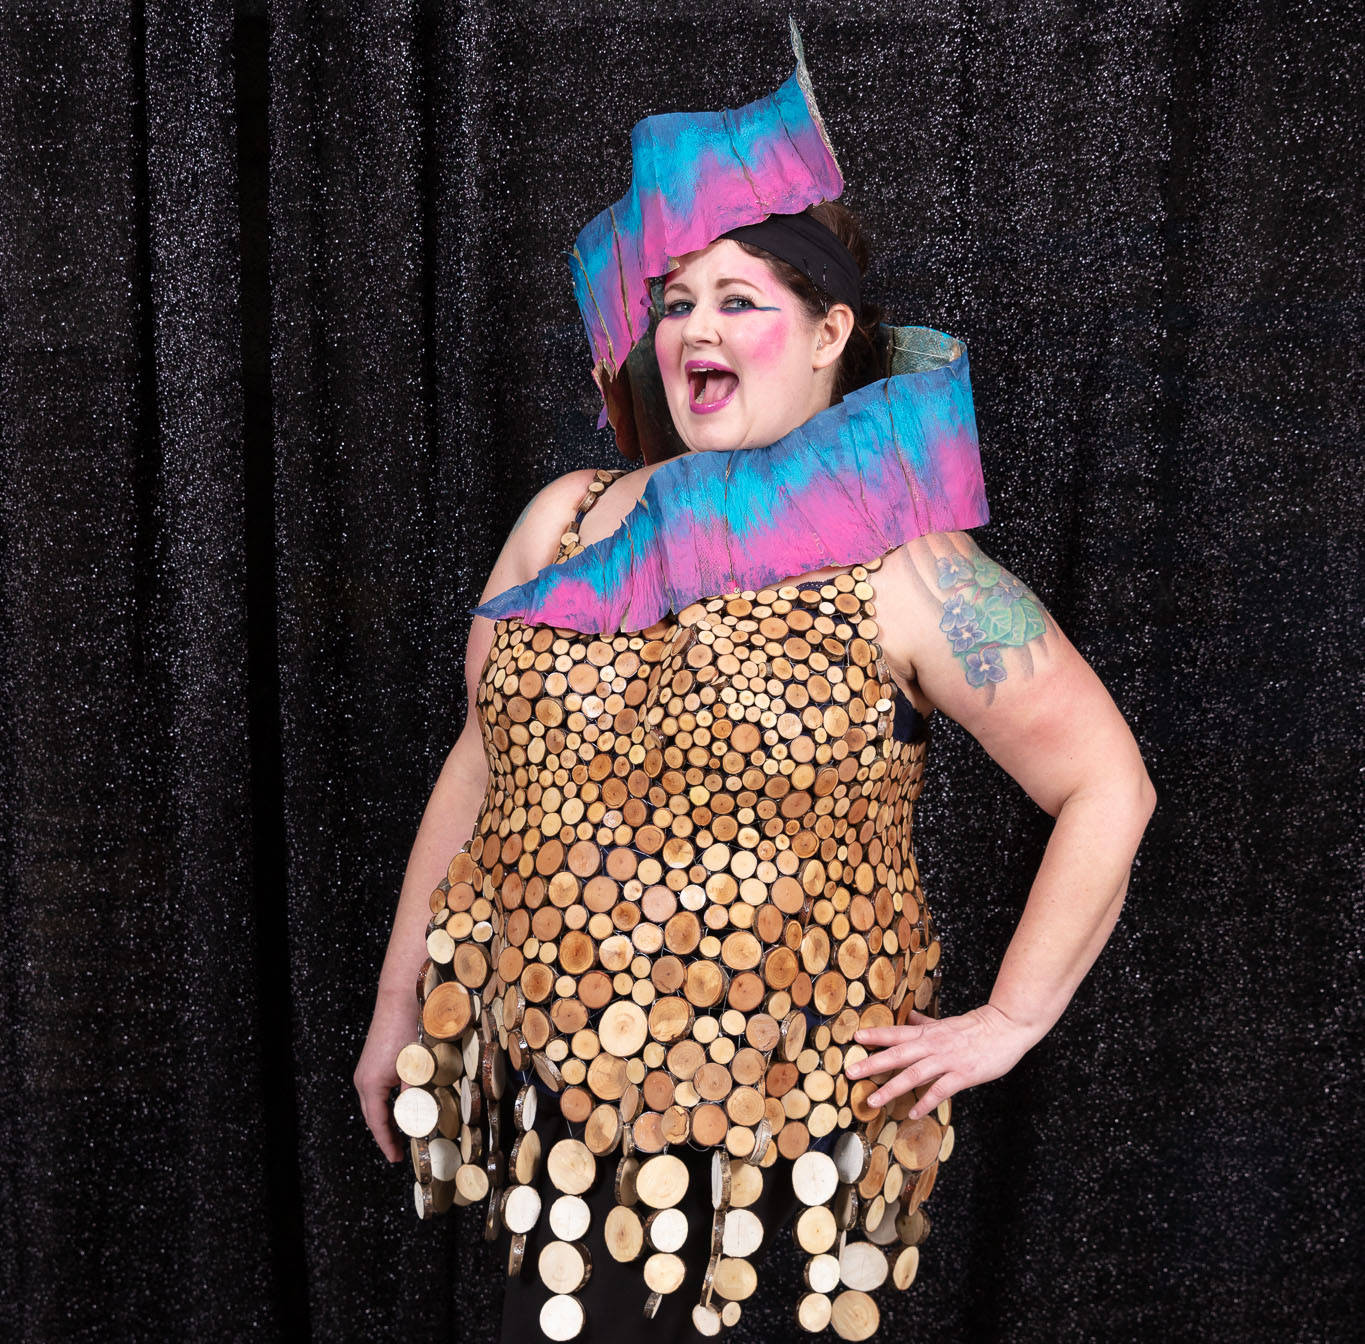 Courtesy Photo/Ron Gile
Wearable Art 2021 is newly reimagined and features a variety of pandemic-safe activities. At last year’s event, “La Fauna et La Flore” by Jessica Sullivan and modeled by Jesse Riessenberger earned the third-place juror’s award at Wearable Art 2020: Joie de Vivre.